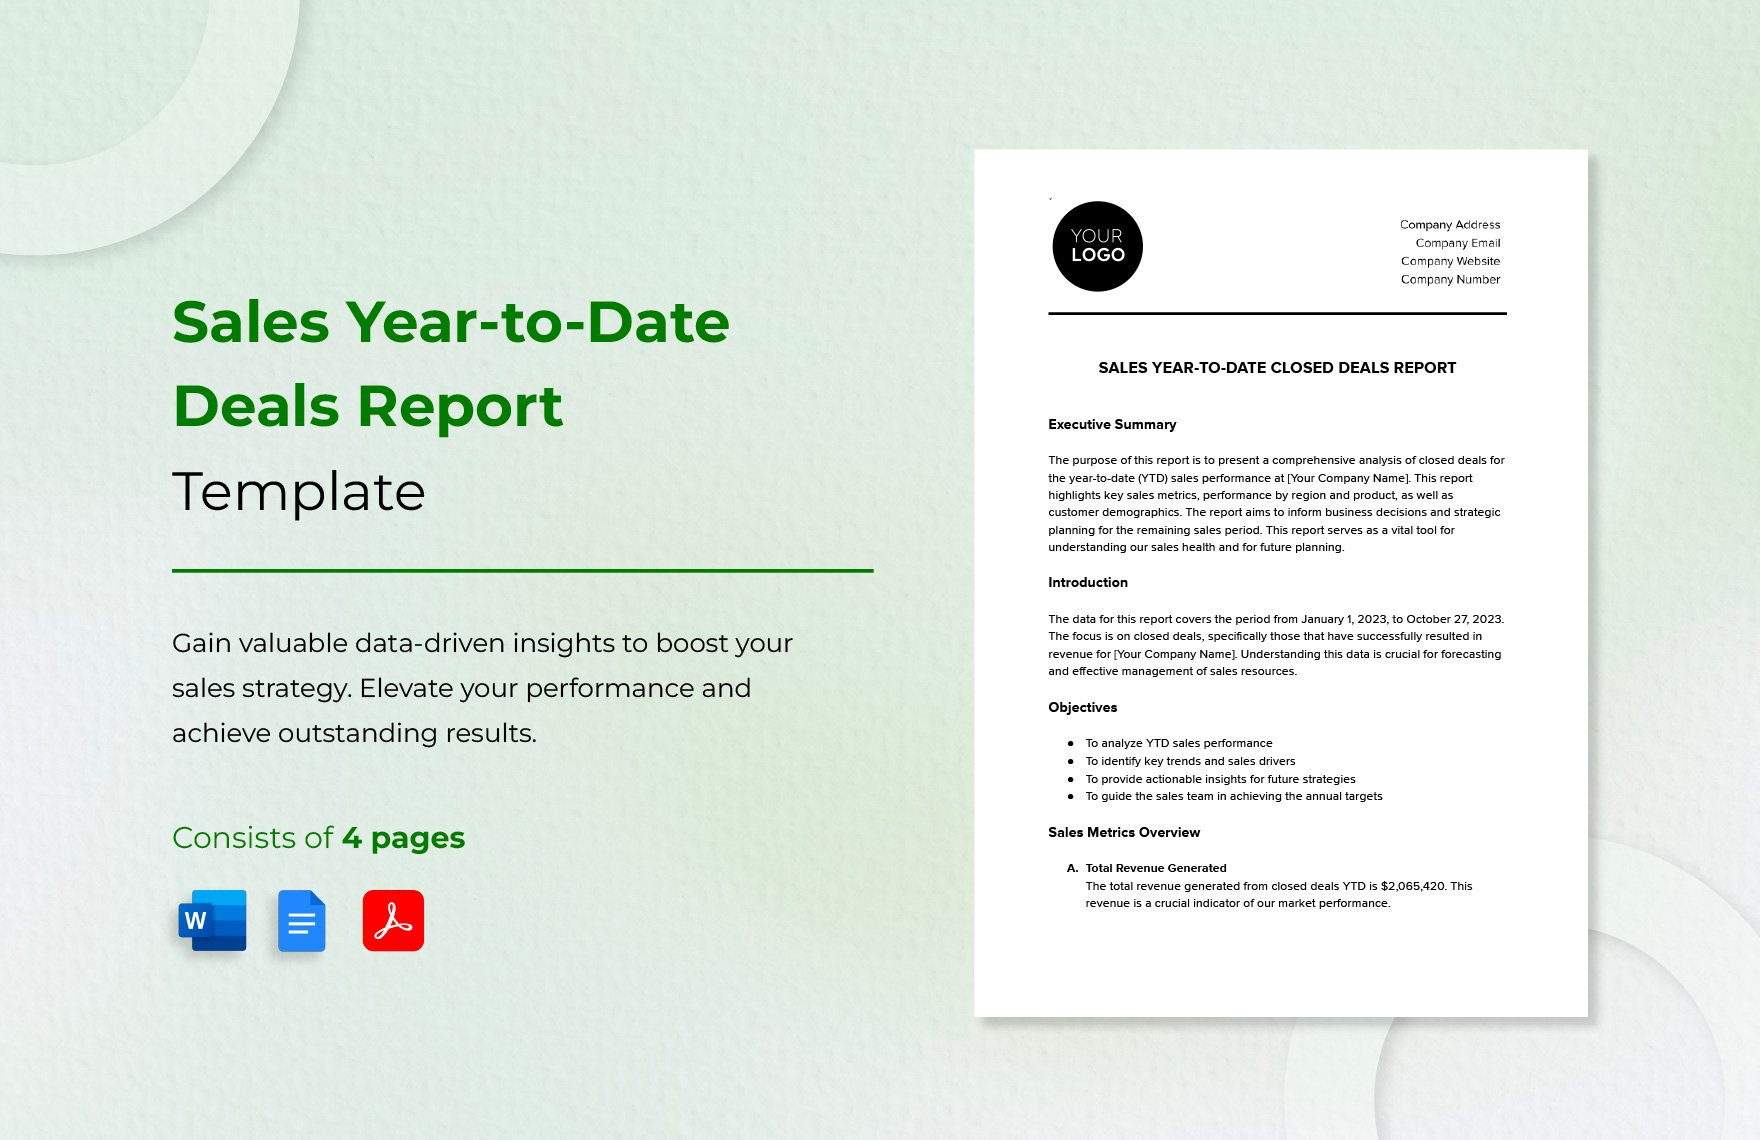 Sales Year-to-Date Closed Deals Report Template